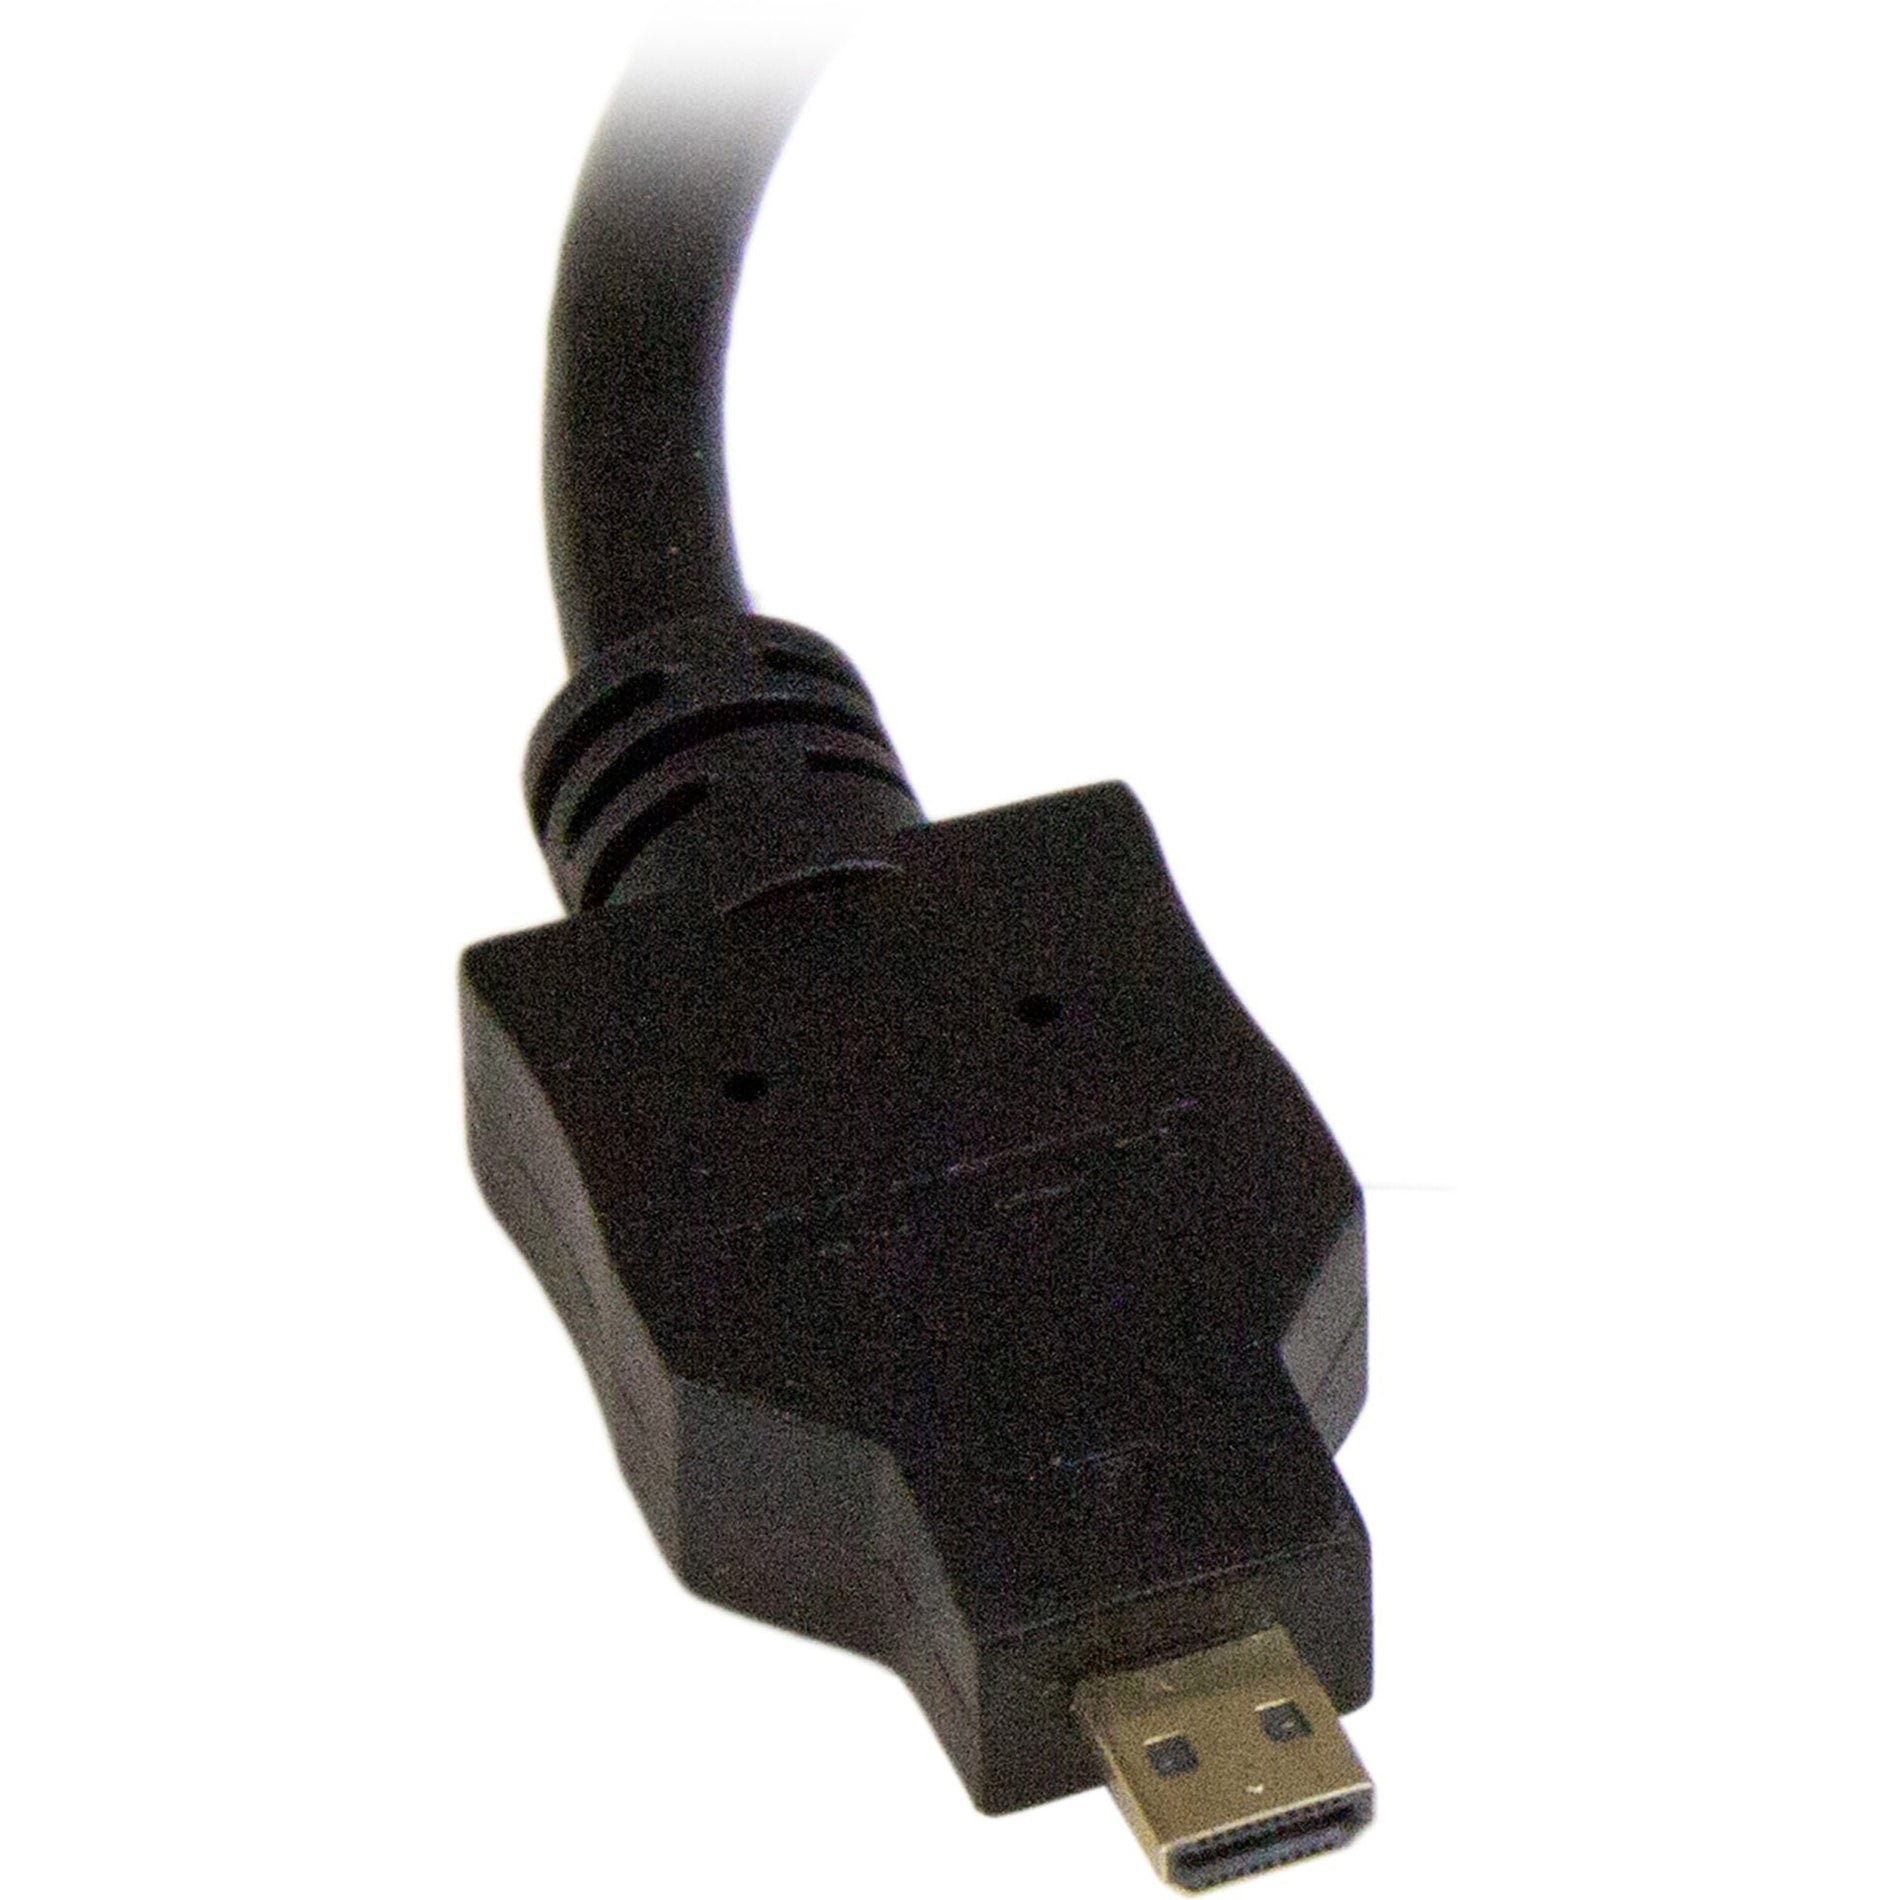 StarTech.com HDDDVIMF8IN Micro HDMI to DVI-D Adapter M/F - 8in, Video Cable Adapter, Gold-Plated Connectors, 1920 x 1200 Resolution [Discontinued]